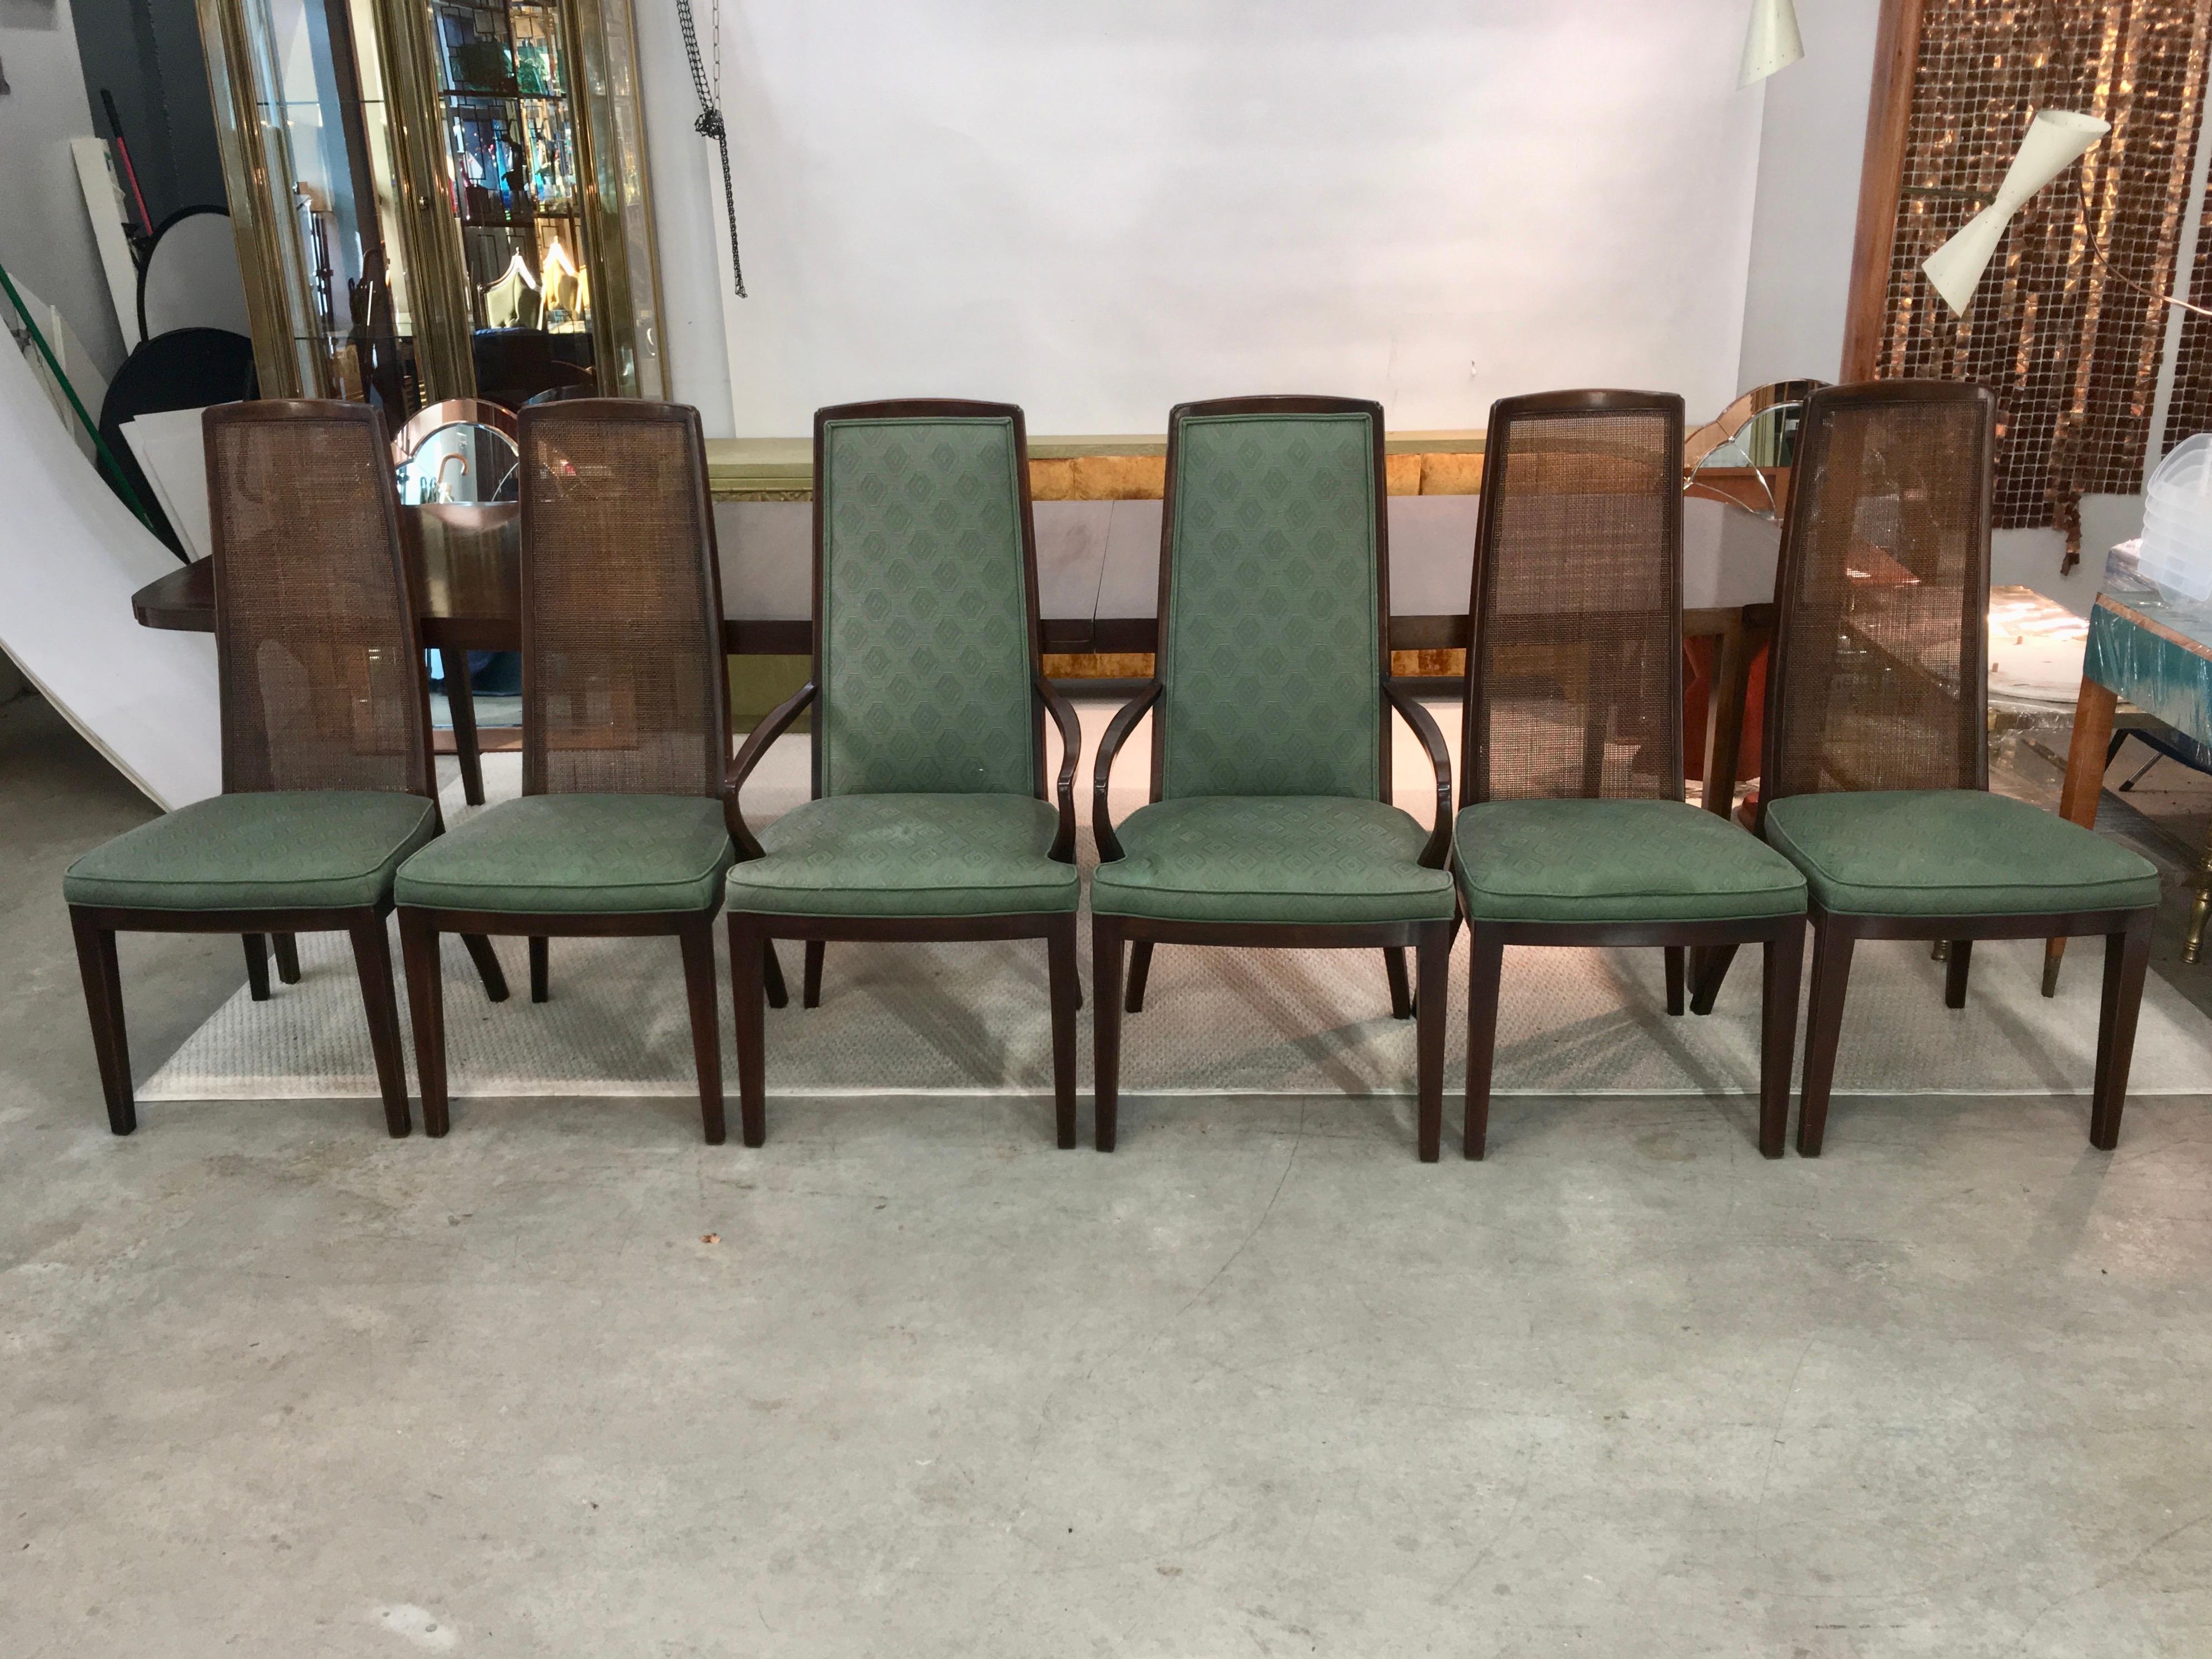 Set of six walnut dining chairs by John Widdicomb, circa 1960. The four side chairs have woven radio cane backs. The two arm chairs have upholstered backs which match the seats. See our separate listing ref: LU886616072242 for the matching dining